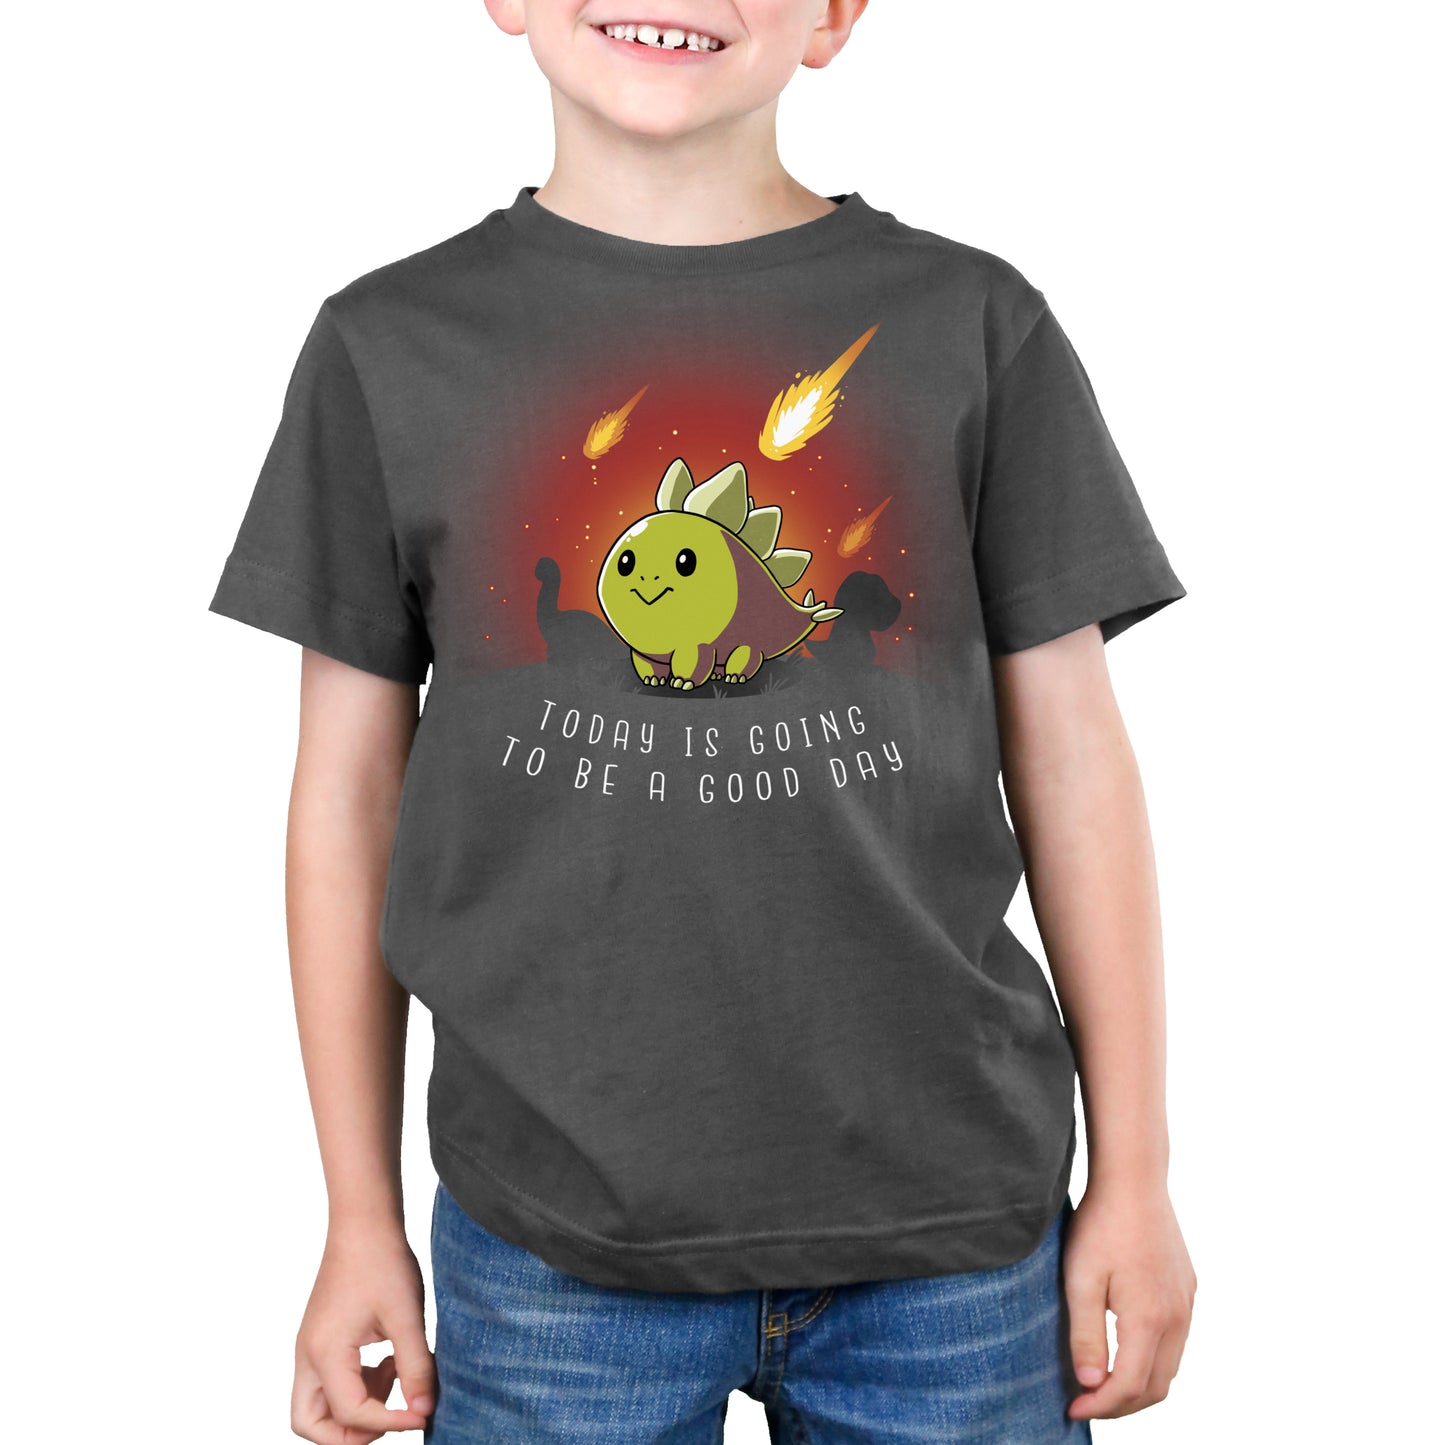 A young boy wearing a TeeTurtle Good Day charcoal gray T-shirt.